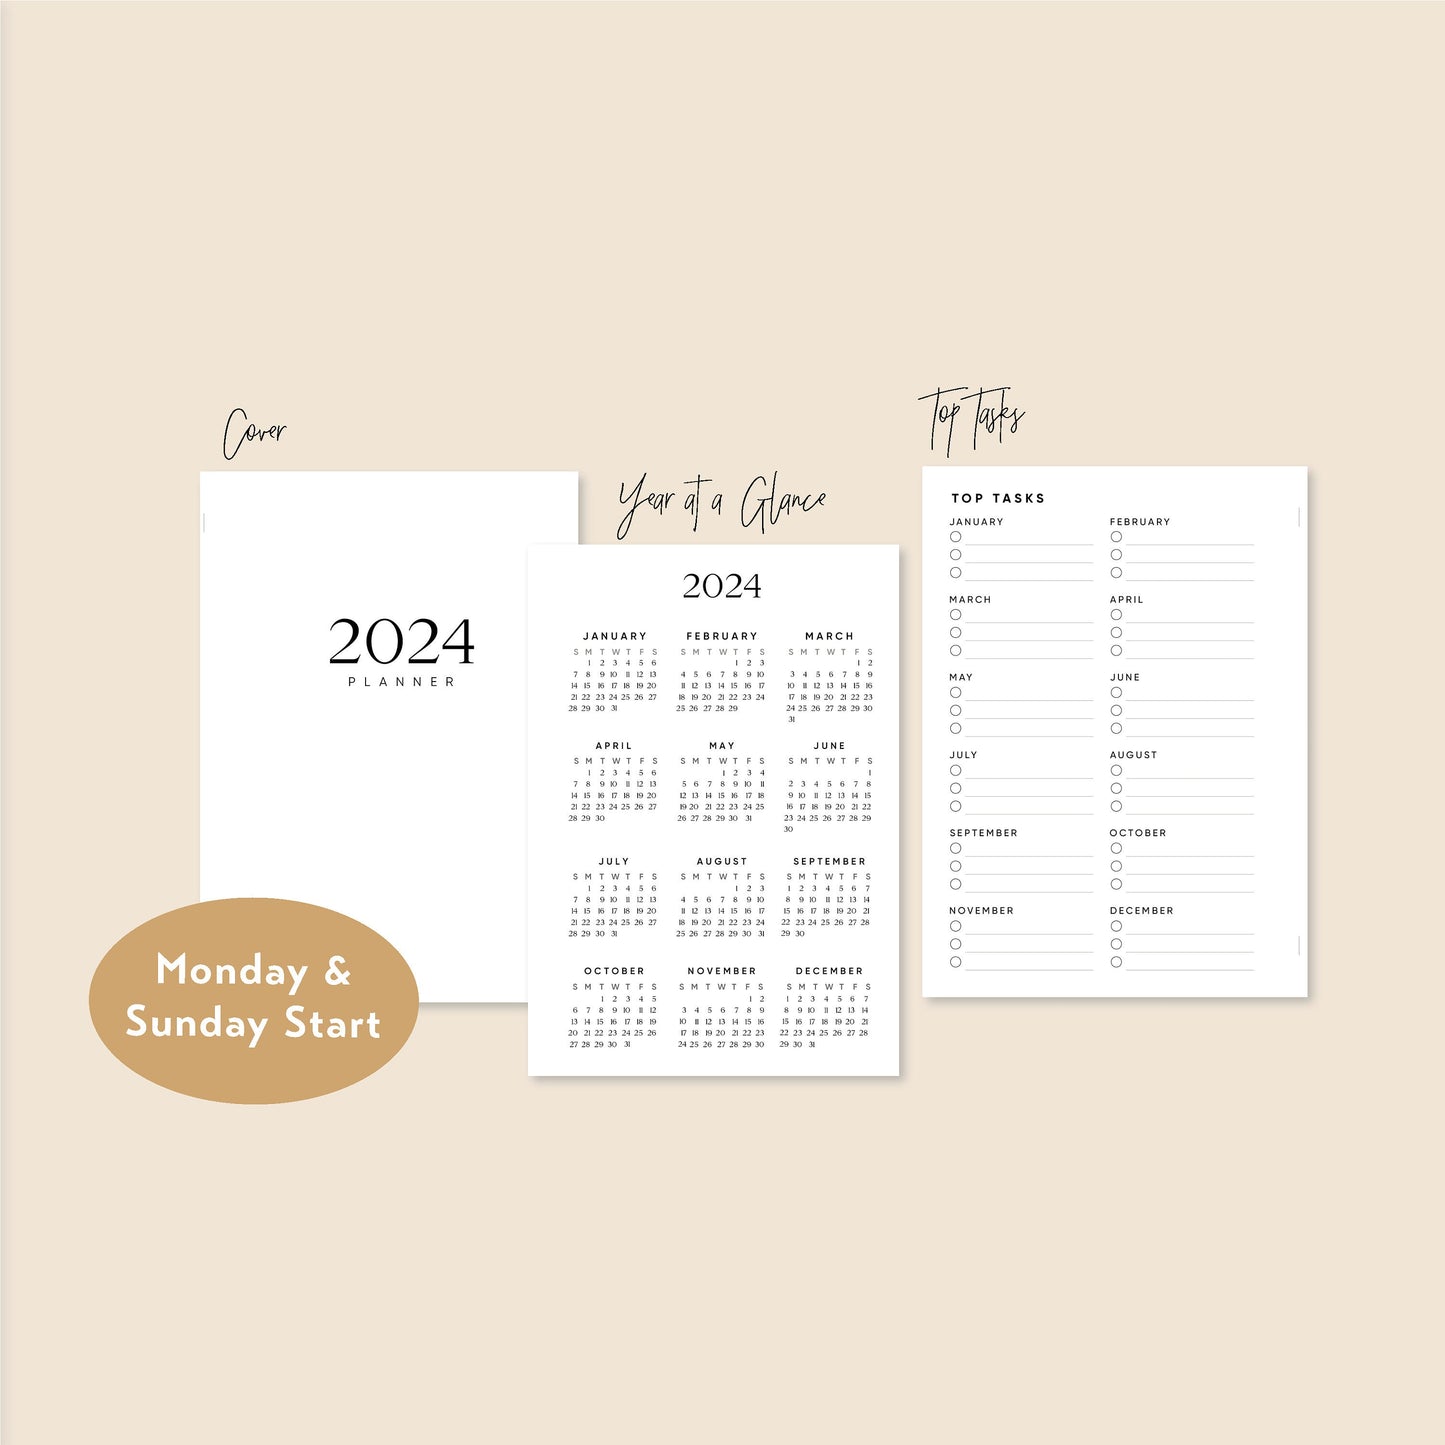 Sep 2023 - Dec 2024 A6 Ring Yearly/Monthly/Weekly Horizontal Printable Set